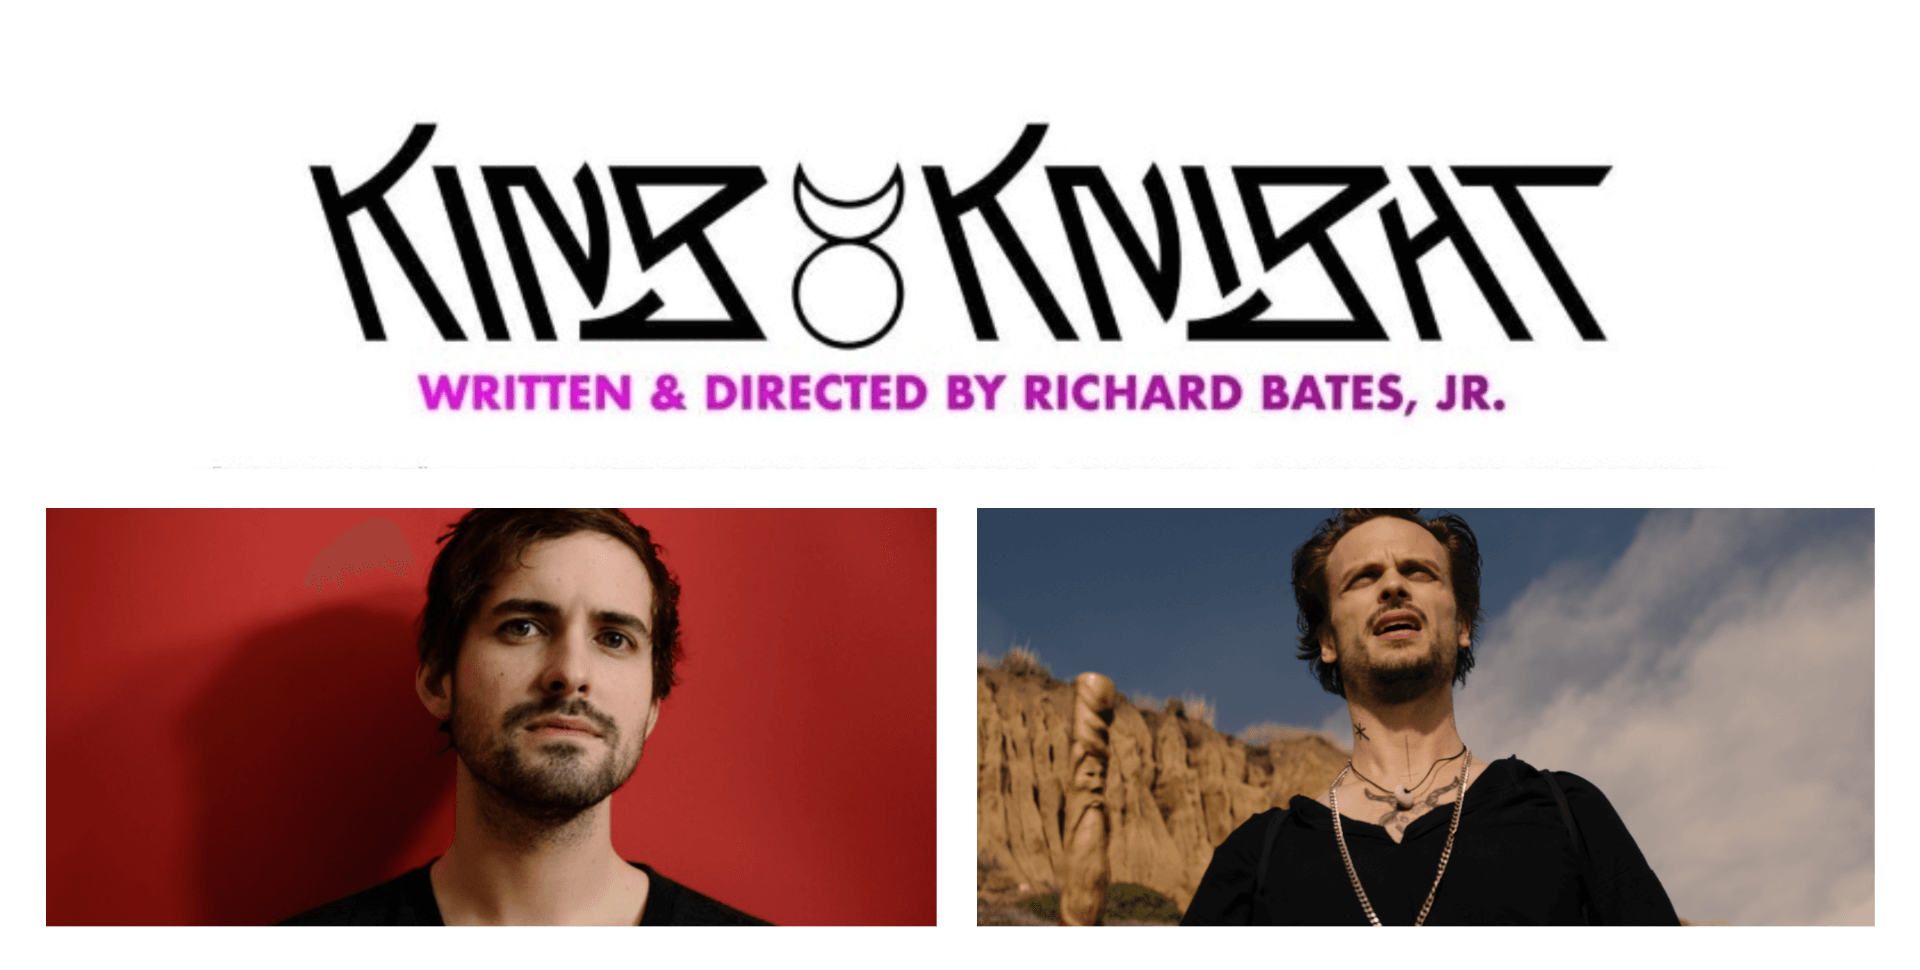 Interview with King Knight writer/director Richard Bates Jr